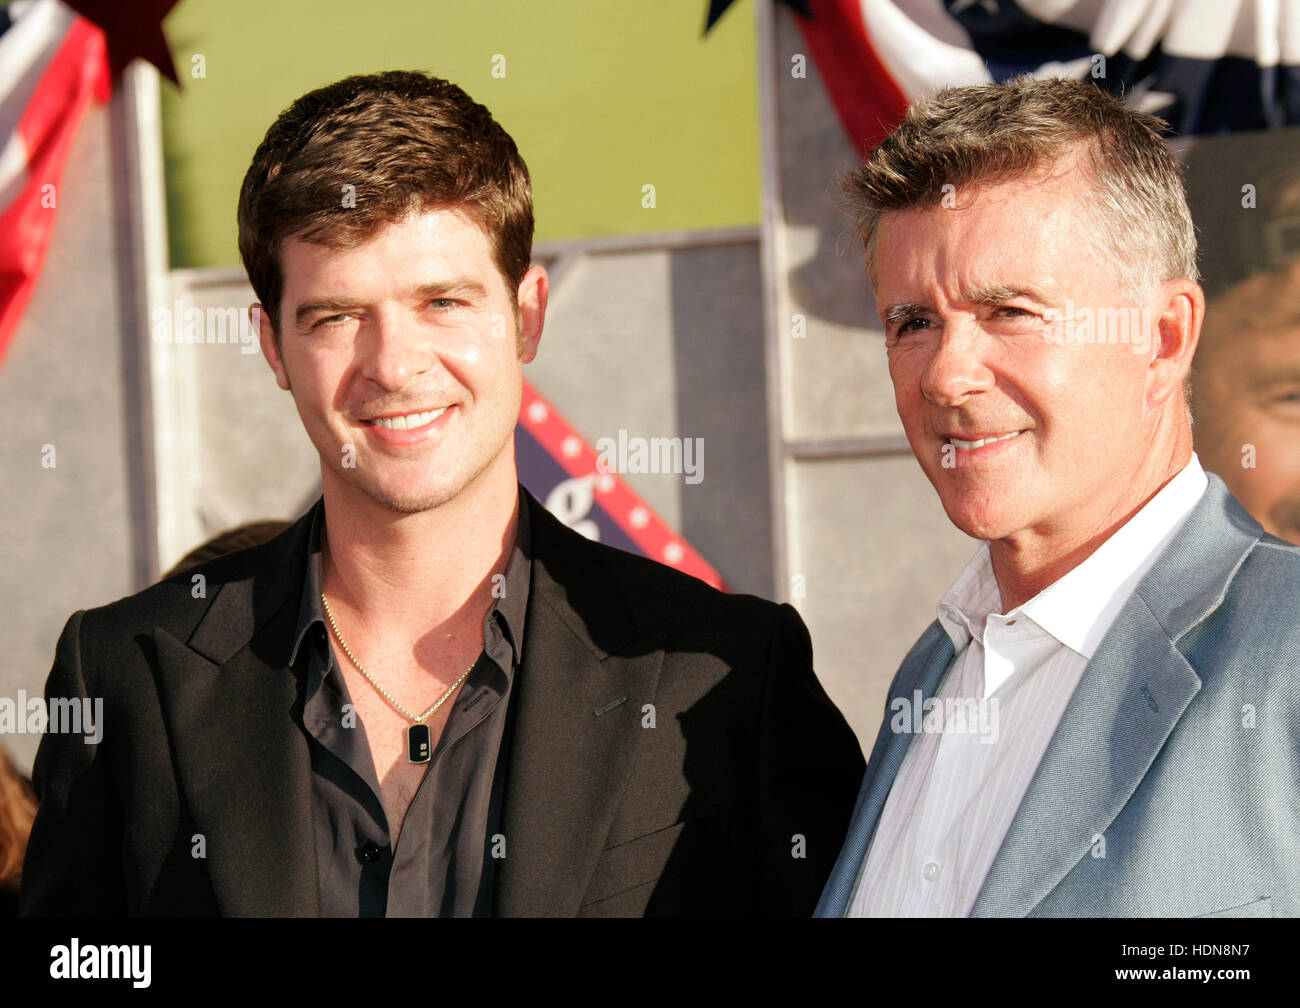 File. 13th Dec, 2016. ALAN THICKE (March 1, 1947 - December 13, 2016) was a Canadian actor, songwriter, and game and talk show host. He is known for his role as Jason Seaver, the father on the ABC television series Growing Pains. His son is the singer R. Thicke. Alan, died at age 69, of a heart attack while playing hockey with his 19 year-old son Carter Thicke. Pictured: Jul 24, 2008 - Hollywood, California, USA - Singer ROBIN THICKE and Dad ALAN THICKE arriving at the 'Swing Vote' World Premiere held at El Capitan Theater © Lisa O'Connor/ZUMAPRESS.com/Alamy Live News Stock Photo